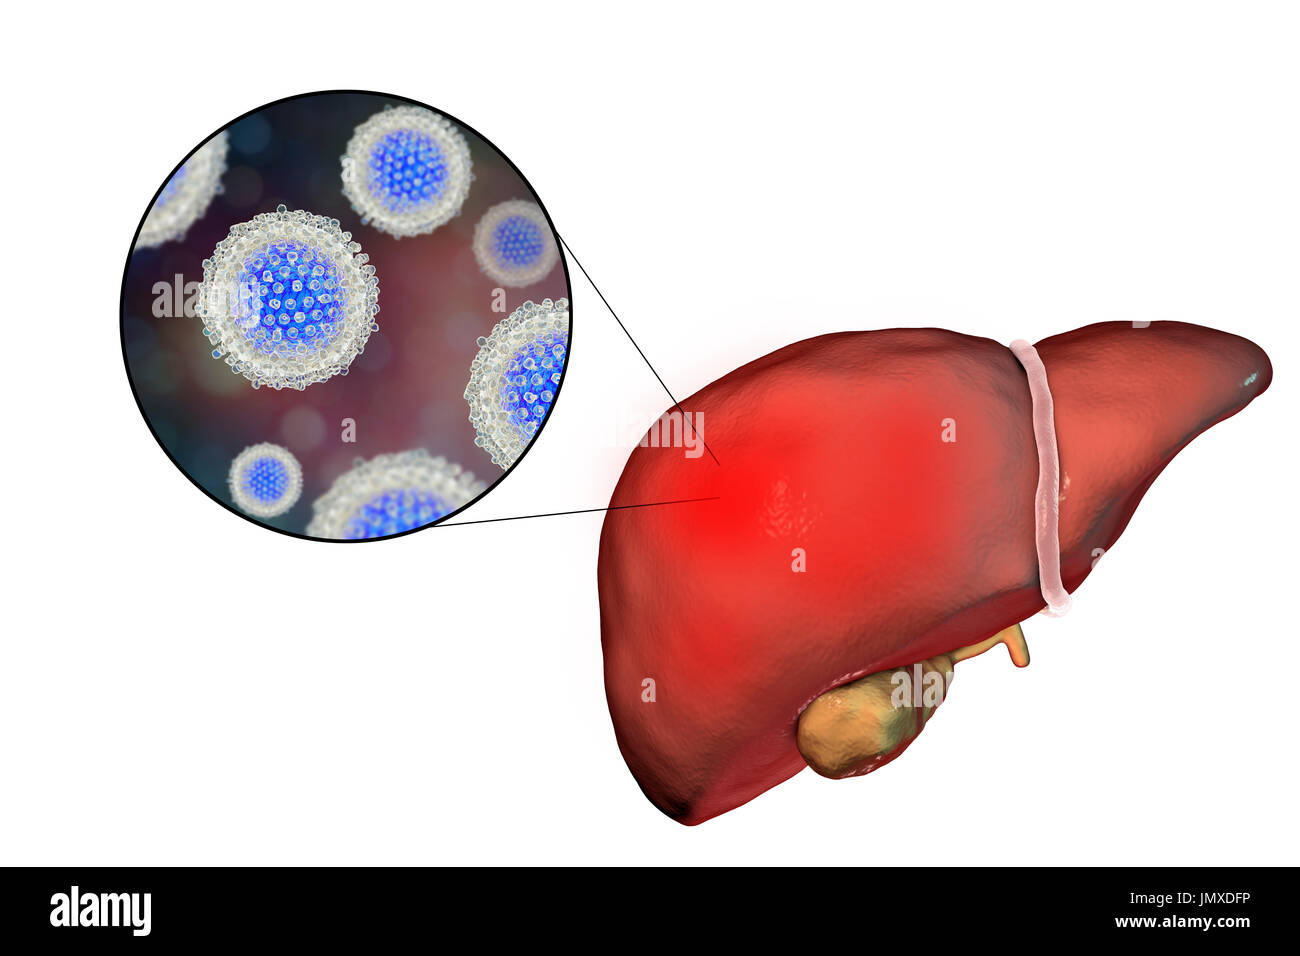 Liver with hepatitis and close-up view of hepatitis C viruses, illustration. Stock Photo